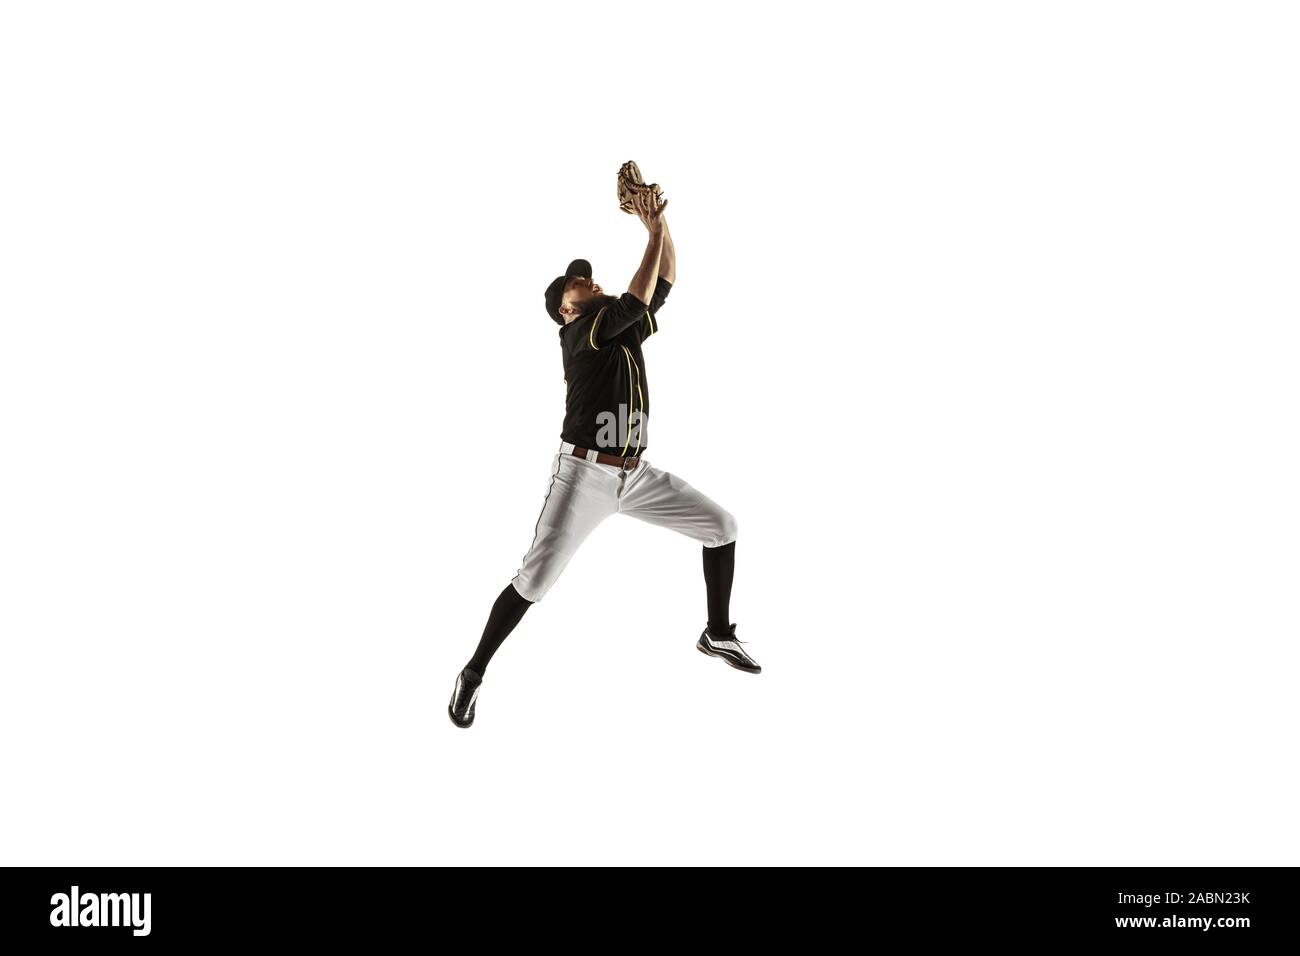 In jump. Baseball player, pitcher in black uniform practicing and training isolated on white background. Young professional sportsman in action and motion. Healthy lifestyle, sport, movement concept. Stock Photo